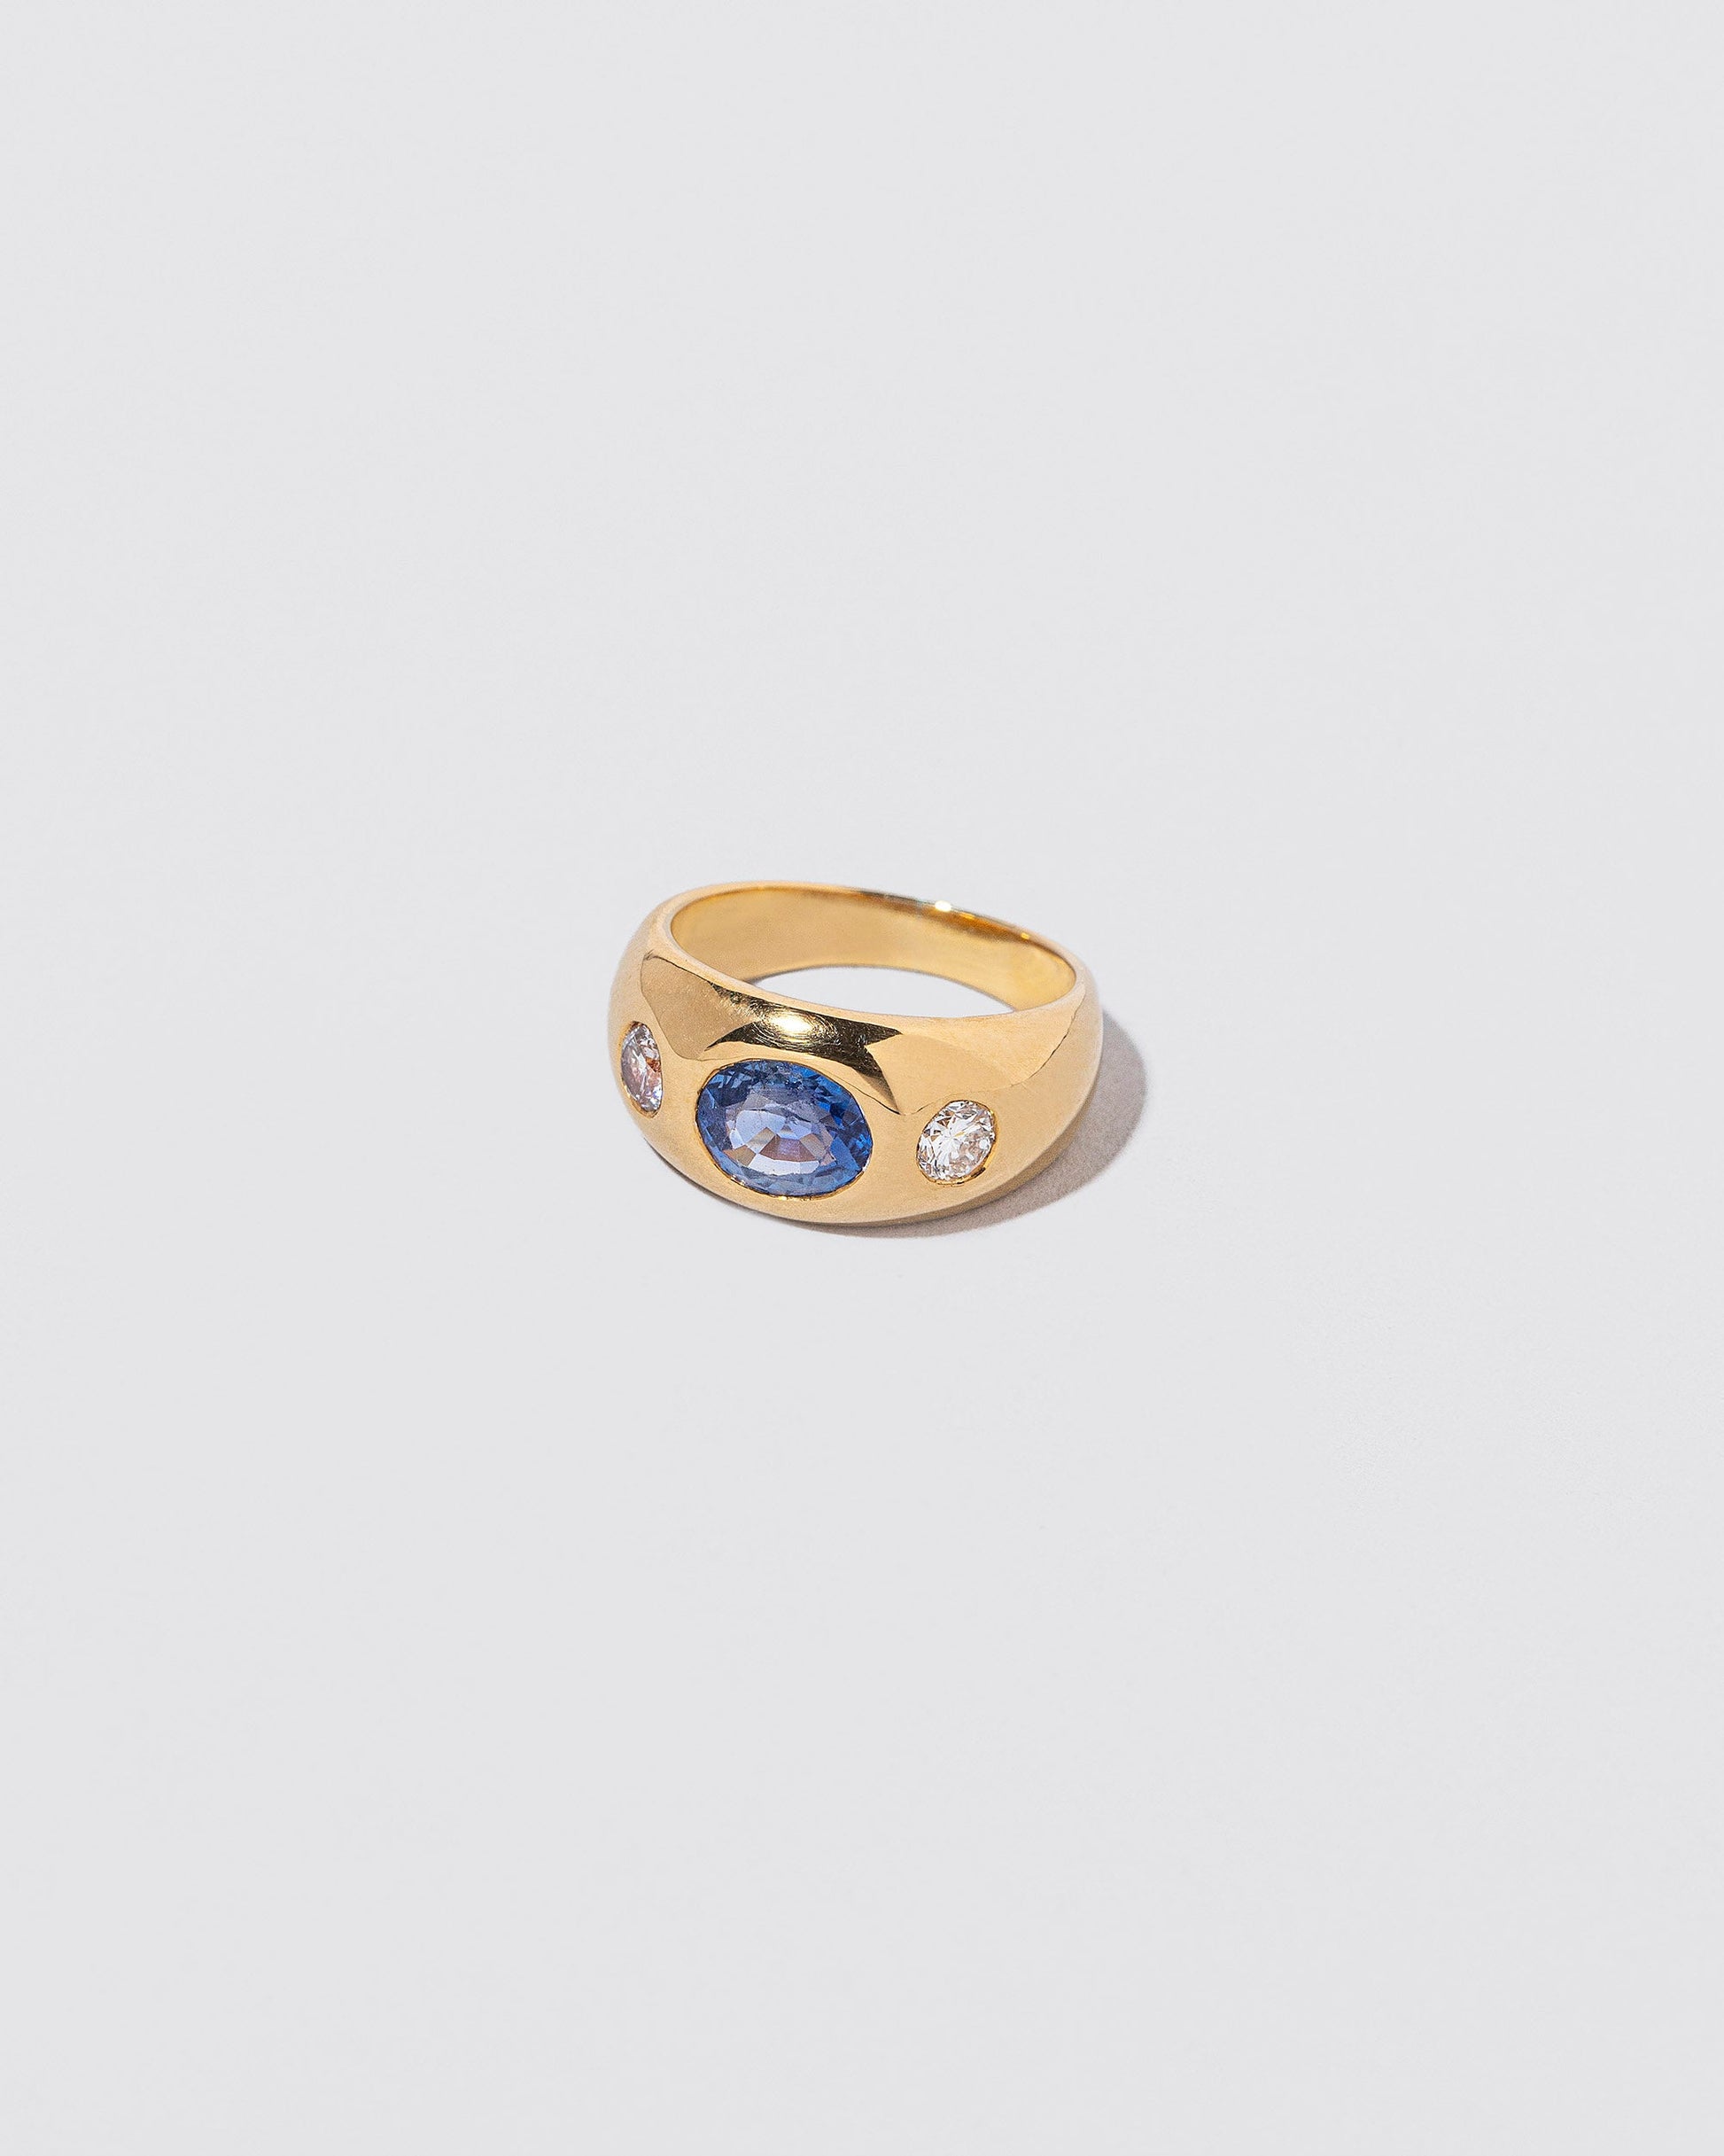  Bvlgari Bombe Ring on light color background.